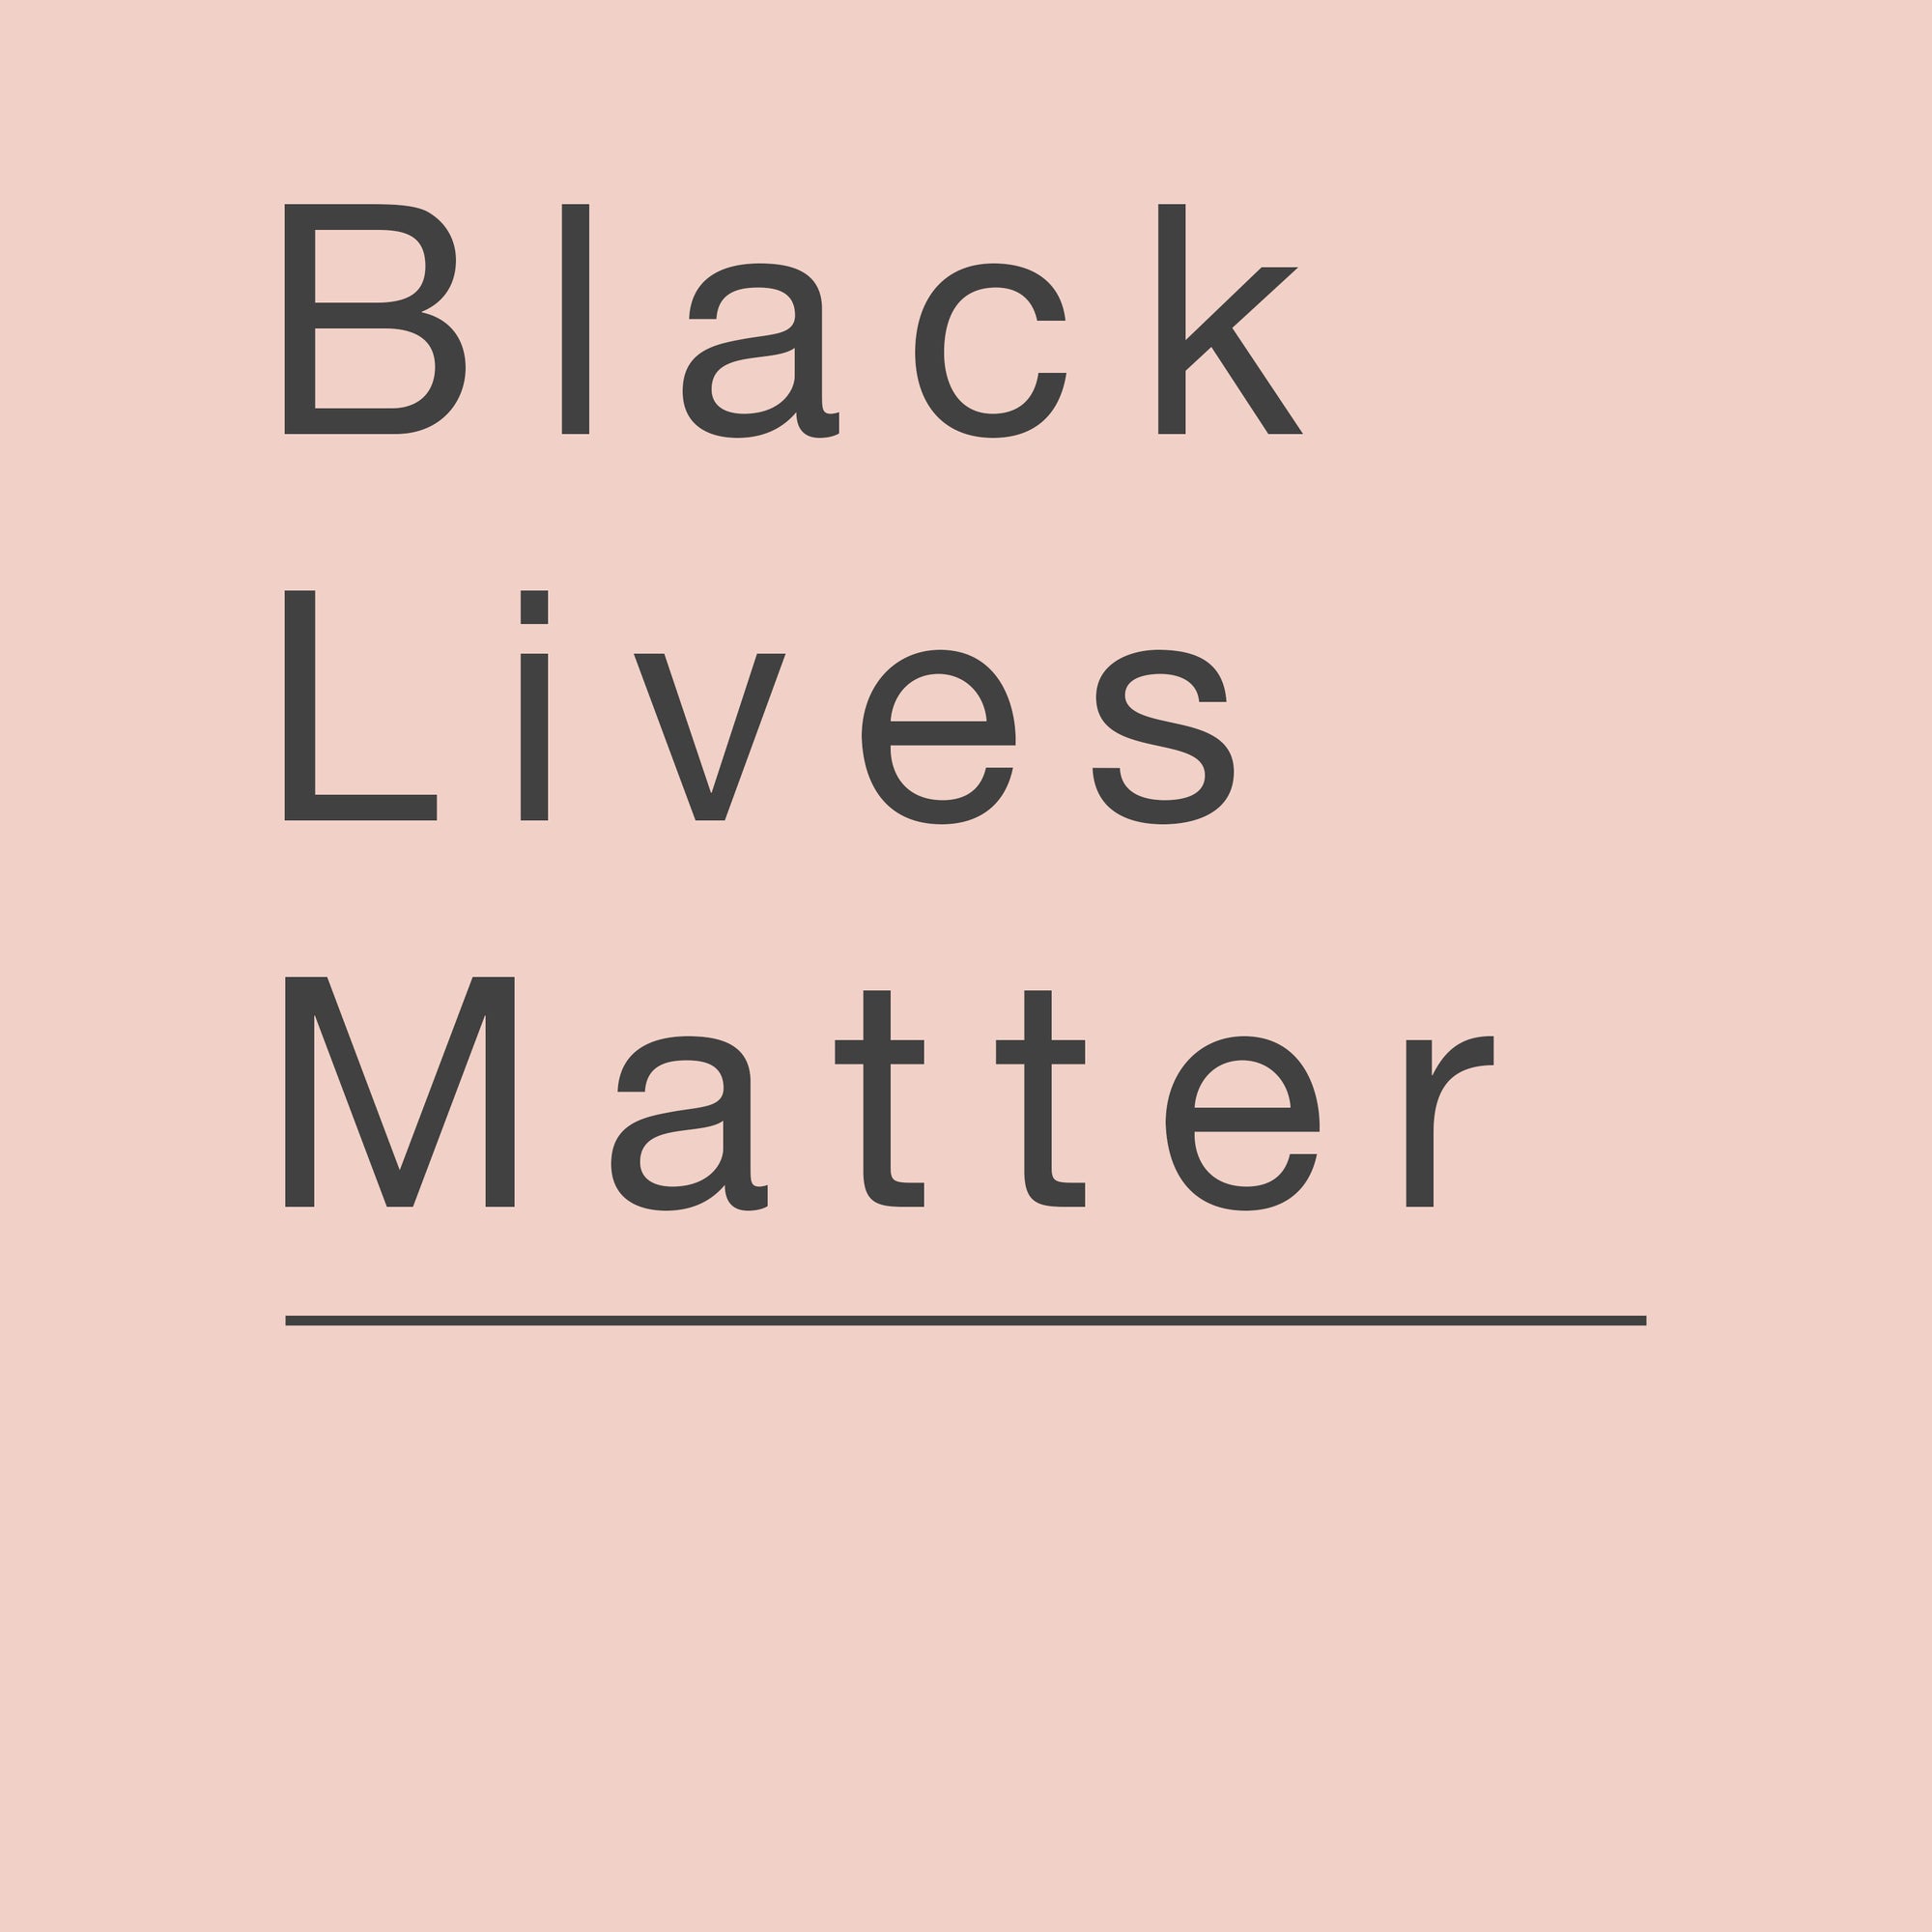 Black Lives Matter - a message from our founder